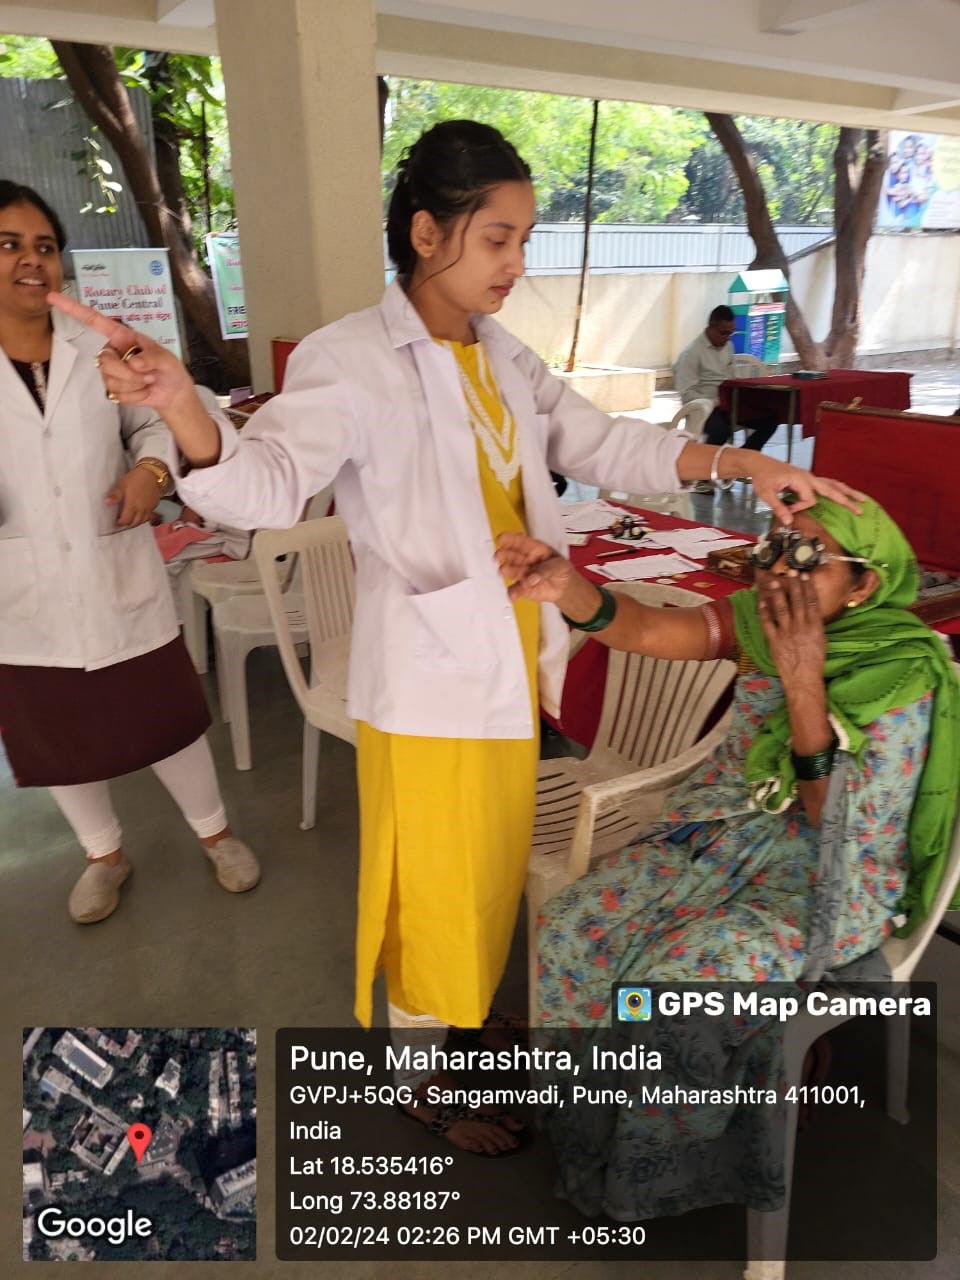 ROTATRY CLUB OF POONA CENTRAL EYE SCREENING CAMP